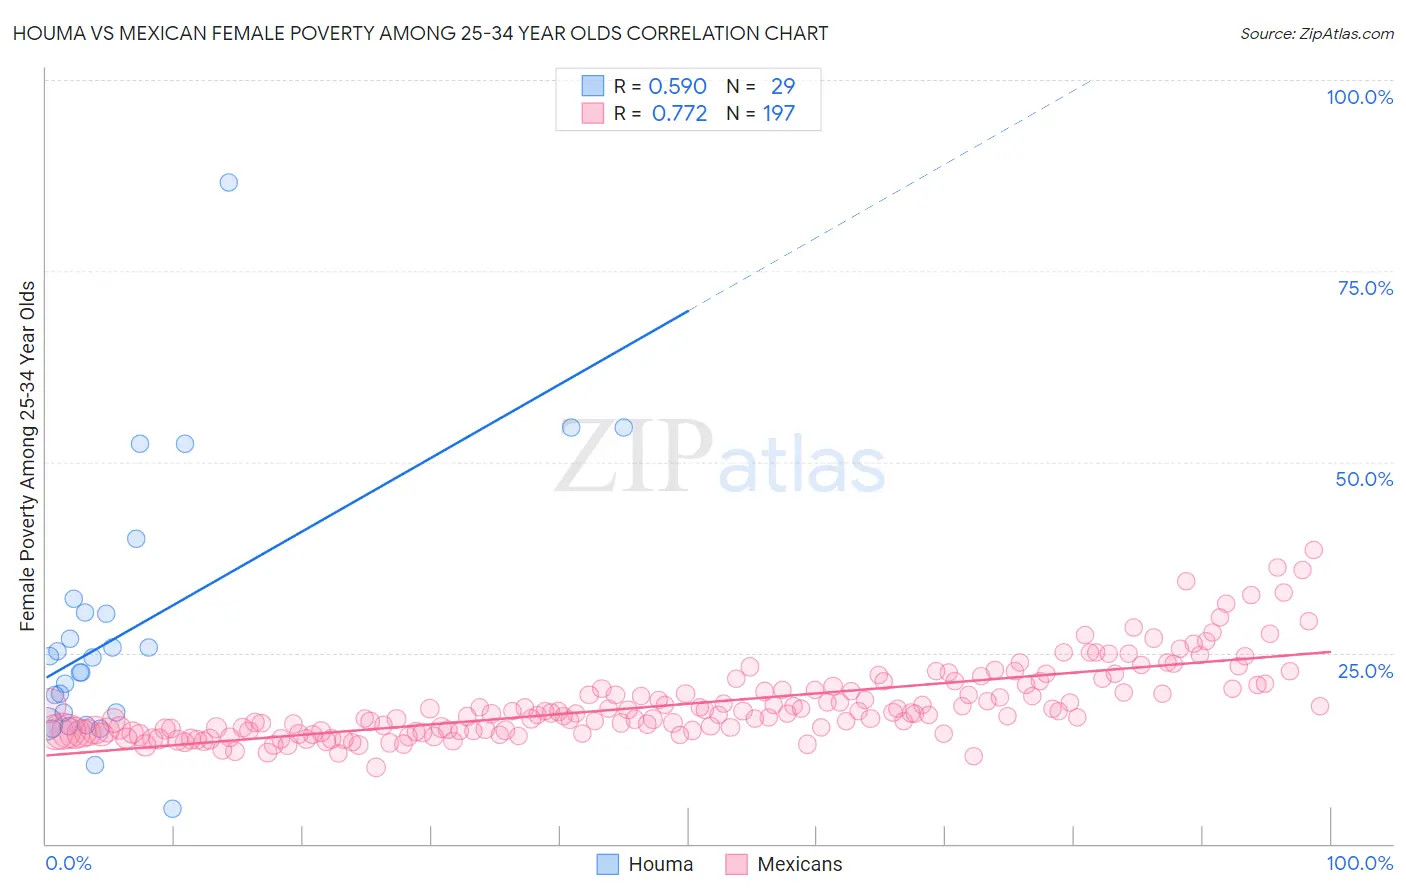 Houma vs Mexican Female Poverty Among 25-34 Year Olds